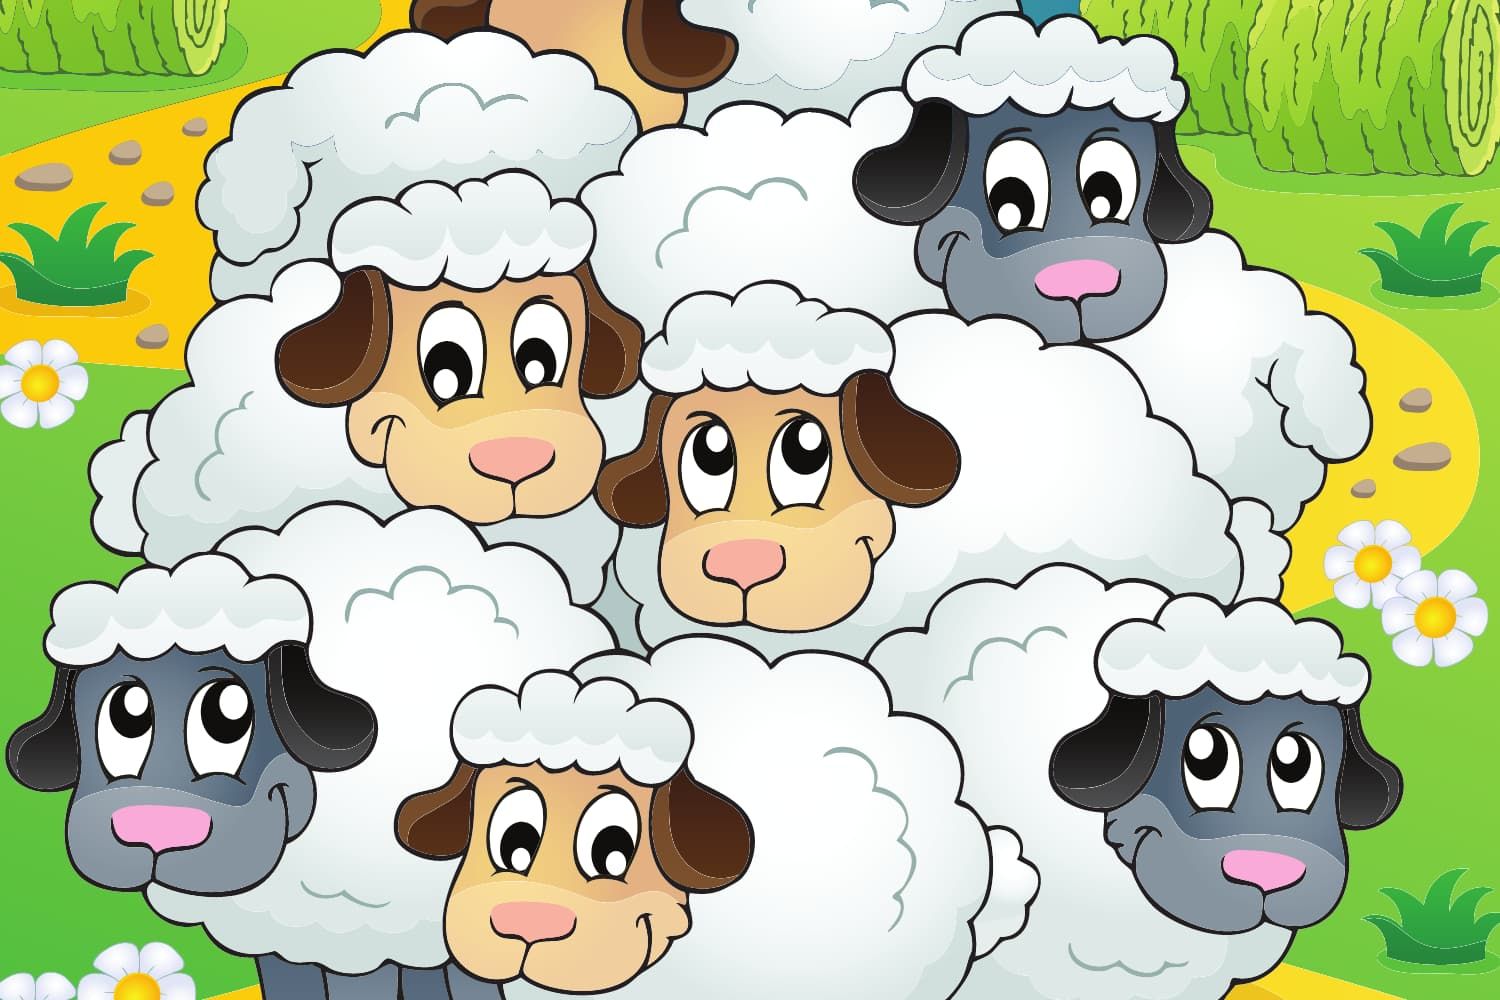 Game%20-%20NT%20Parable%20of%20the%20lost%20sheep%20-%20Count%20the%20sheep-b72376df Animals